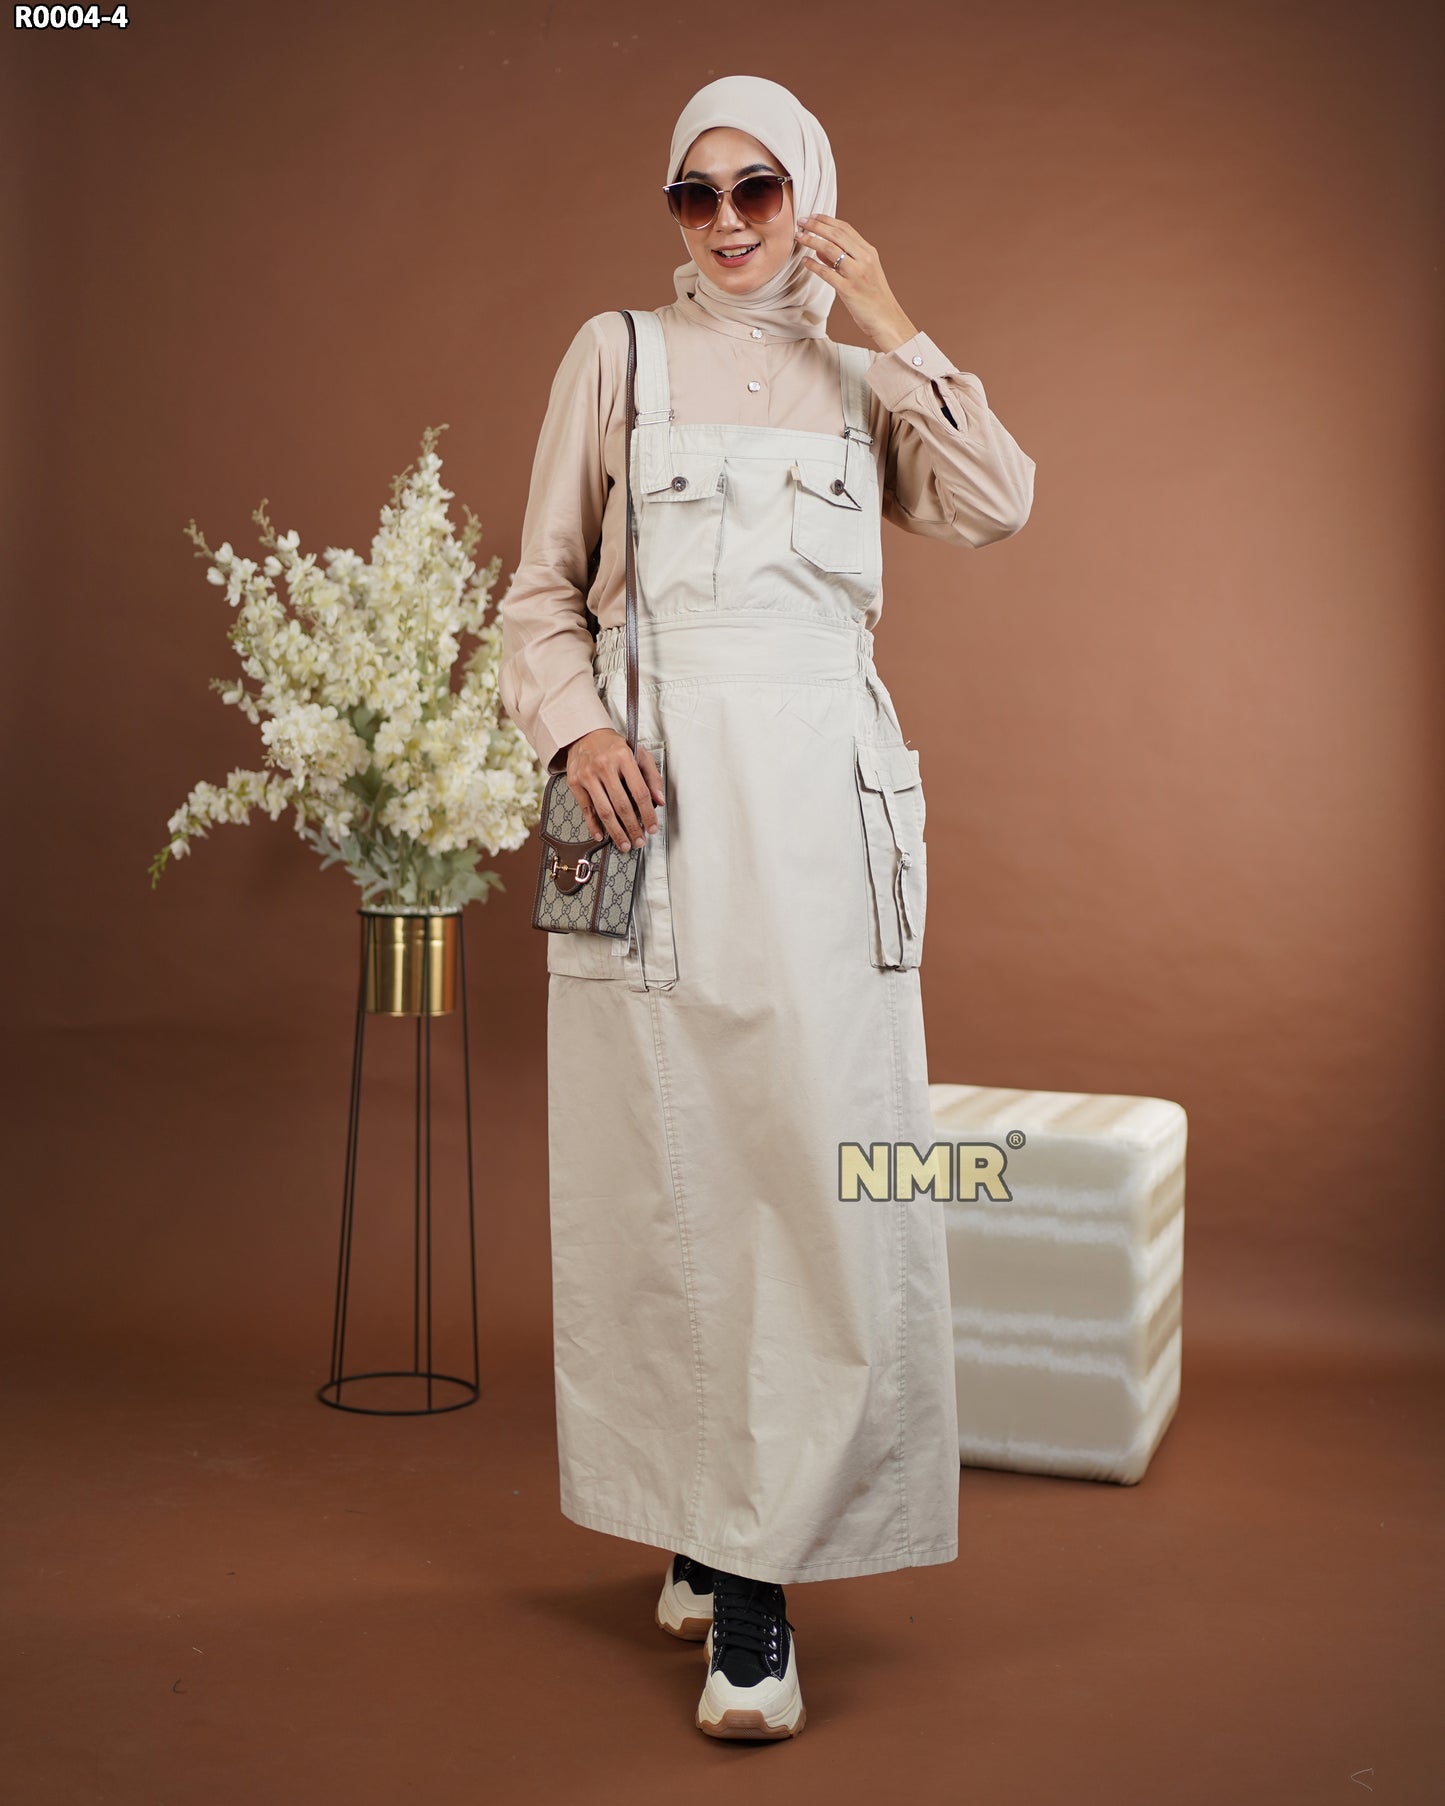 NMR Gamis Jumpsuit Overall Baby Canvas Vol R004-4